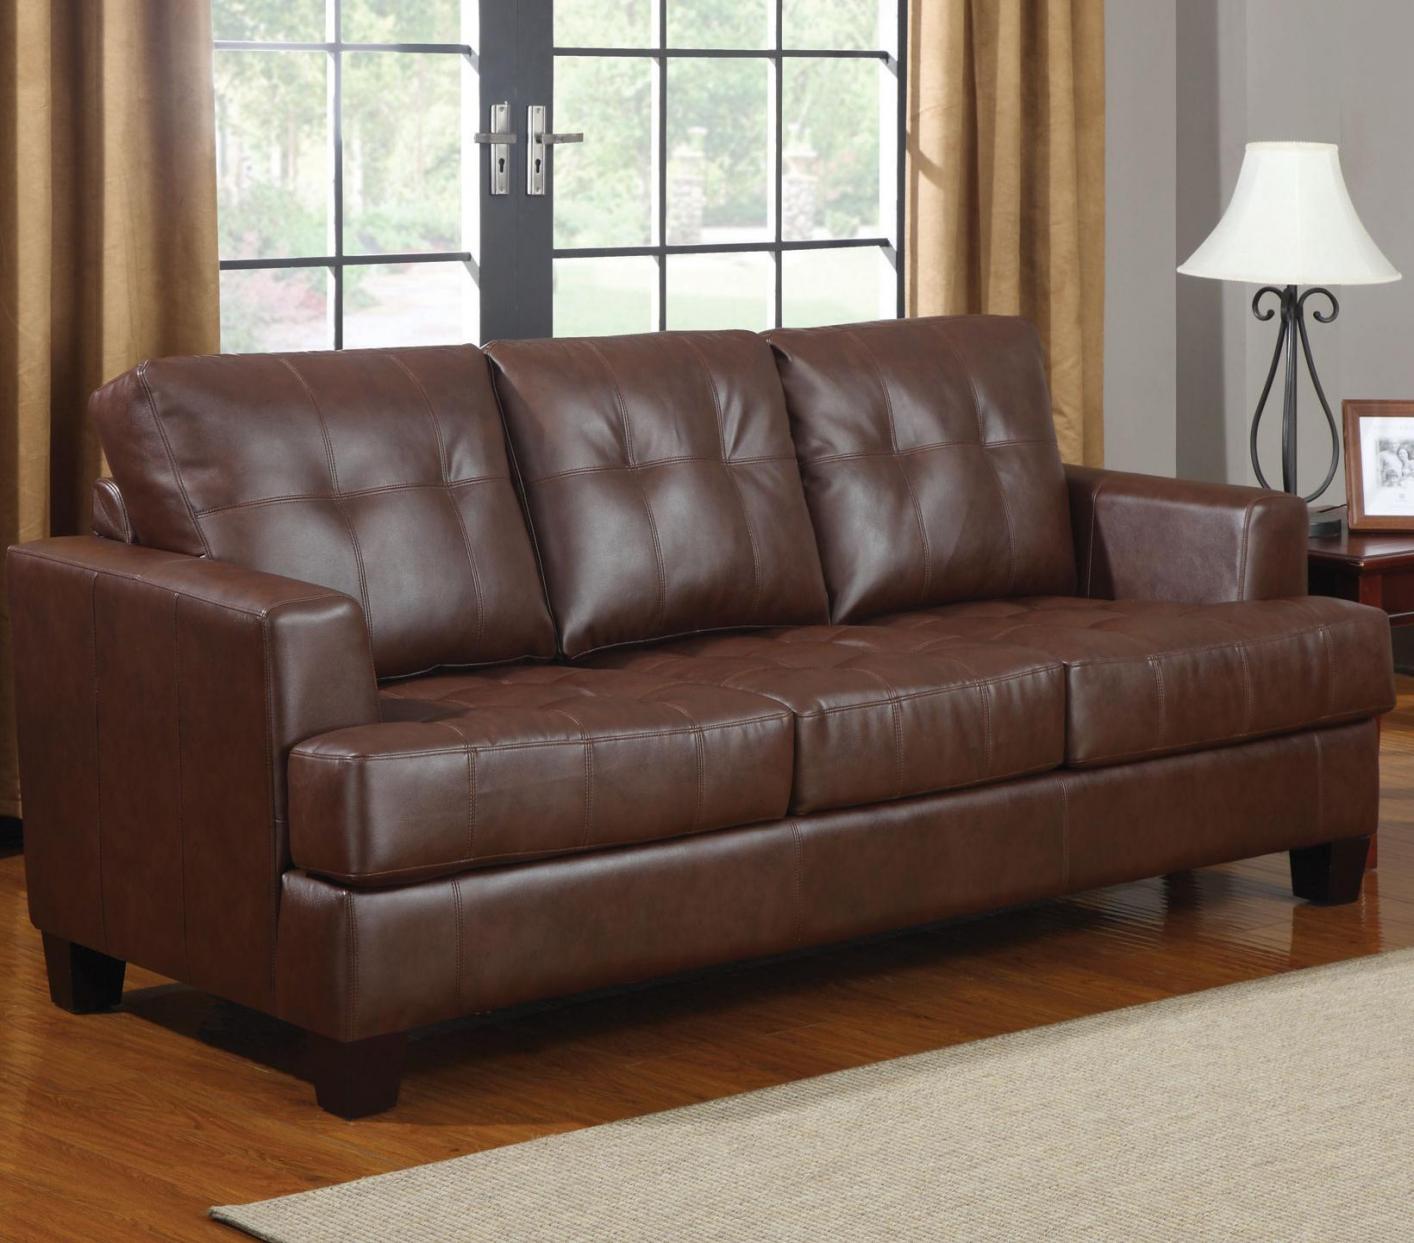 How to maintain your brown leather sofa